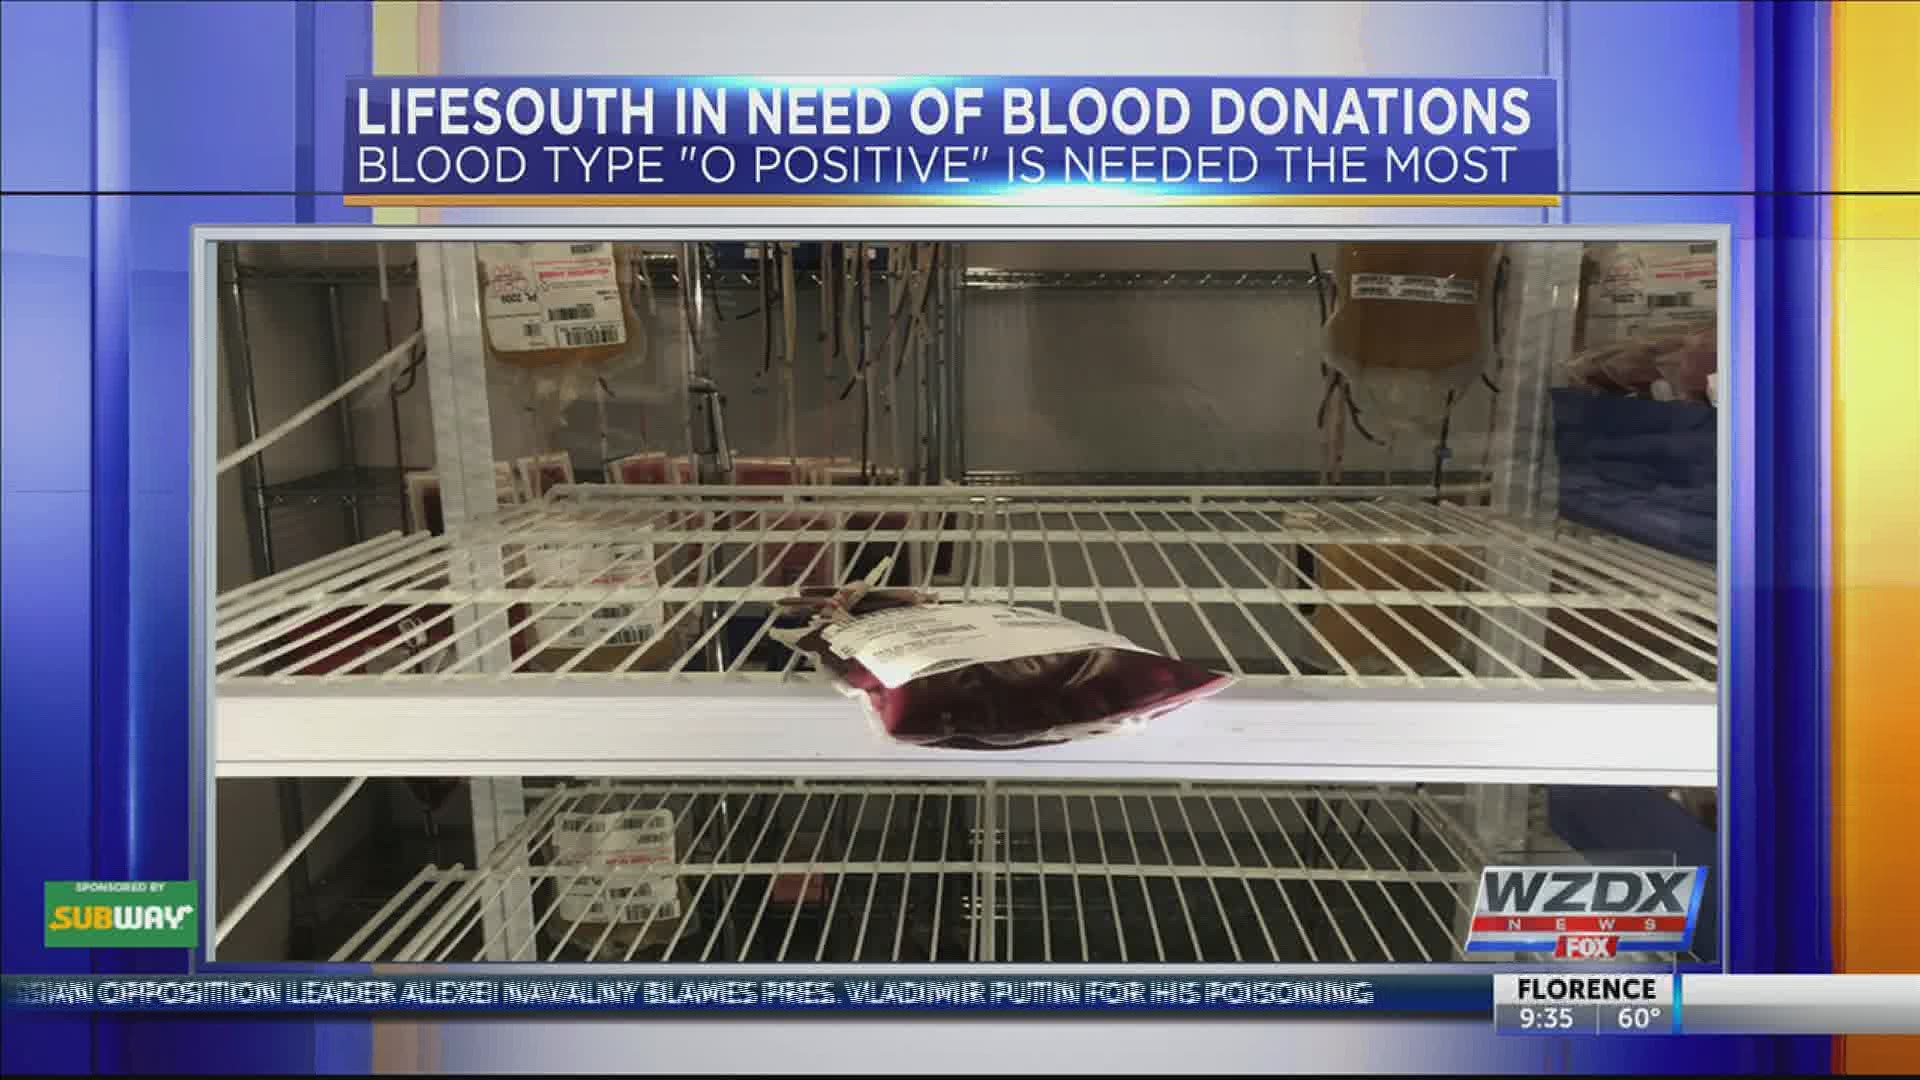 LifeSouth Community Blood Centers is facing an emergency need for blood donors, especially type O positive, the organization said.